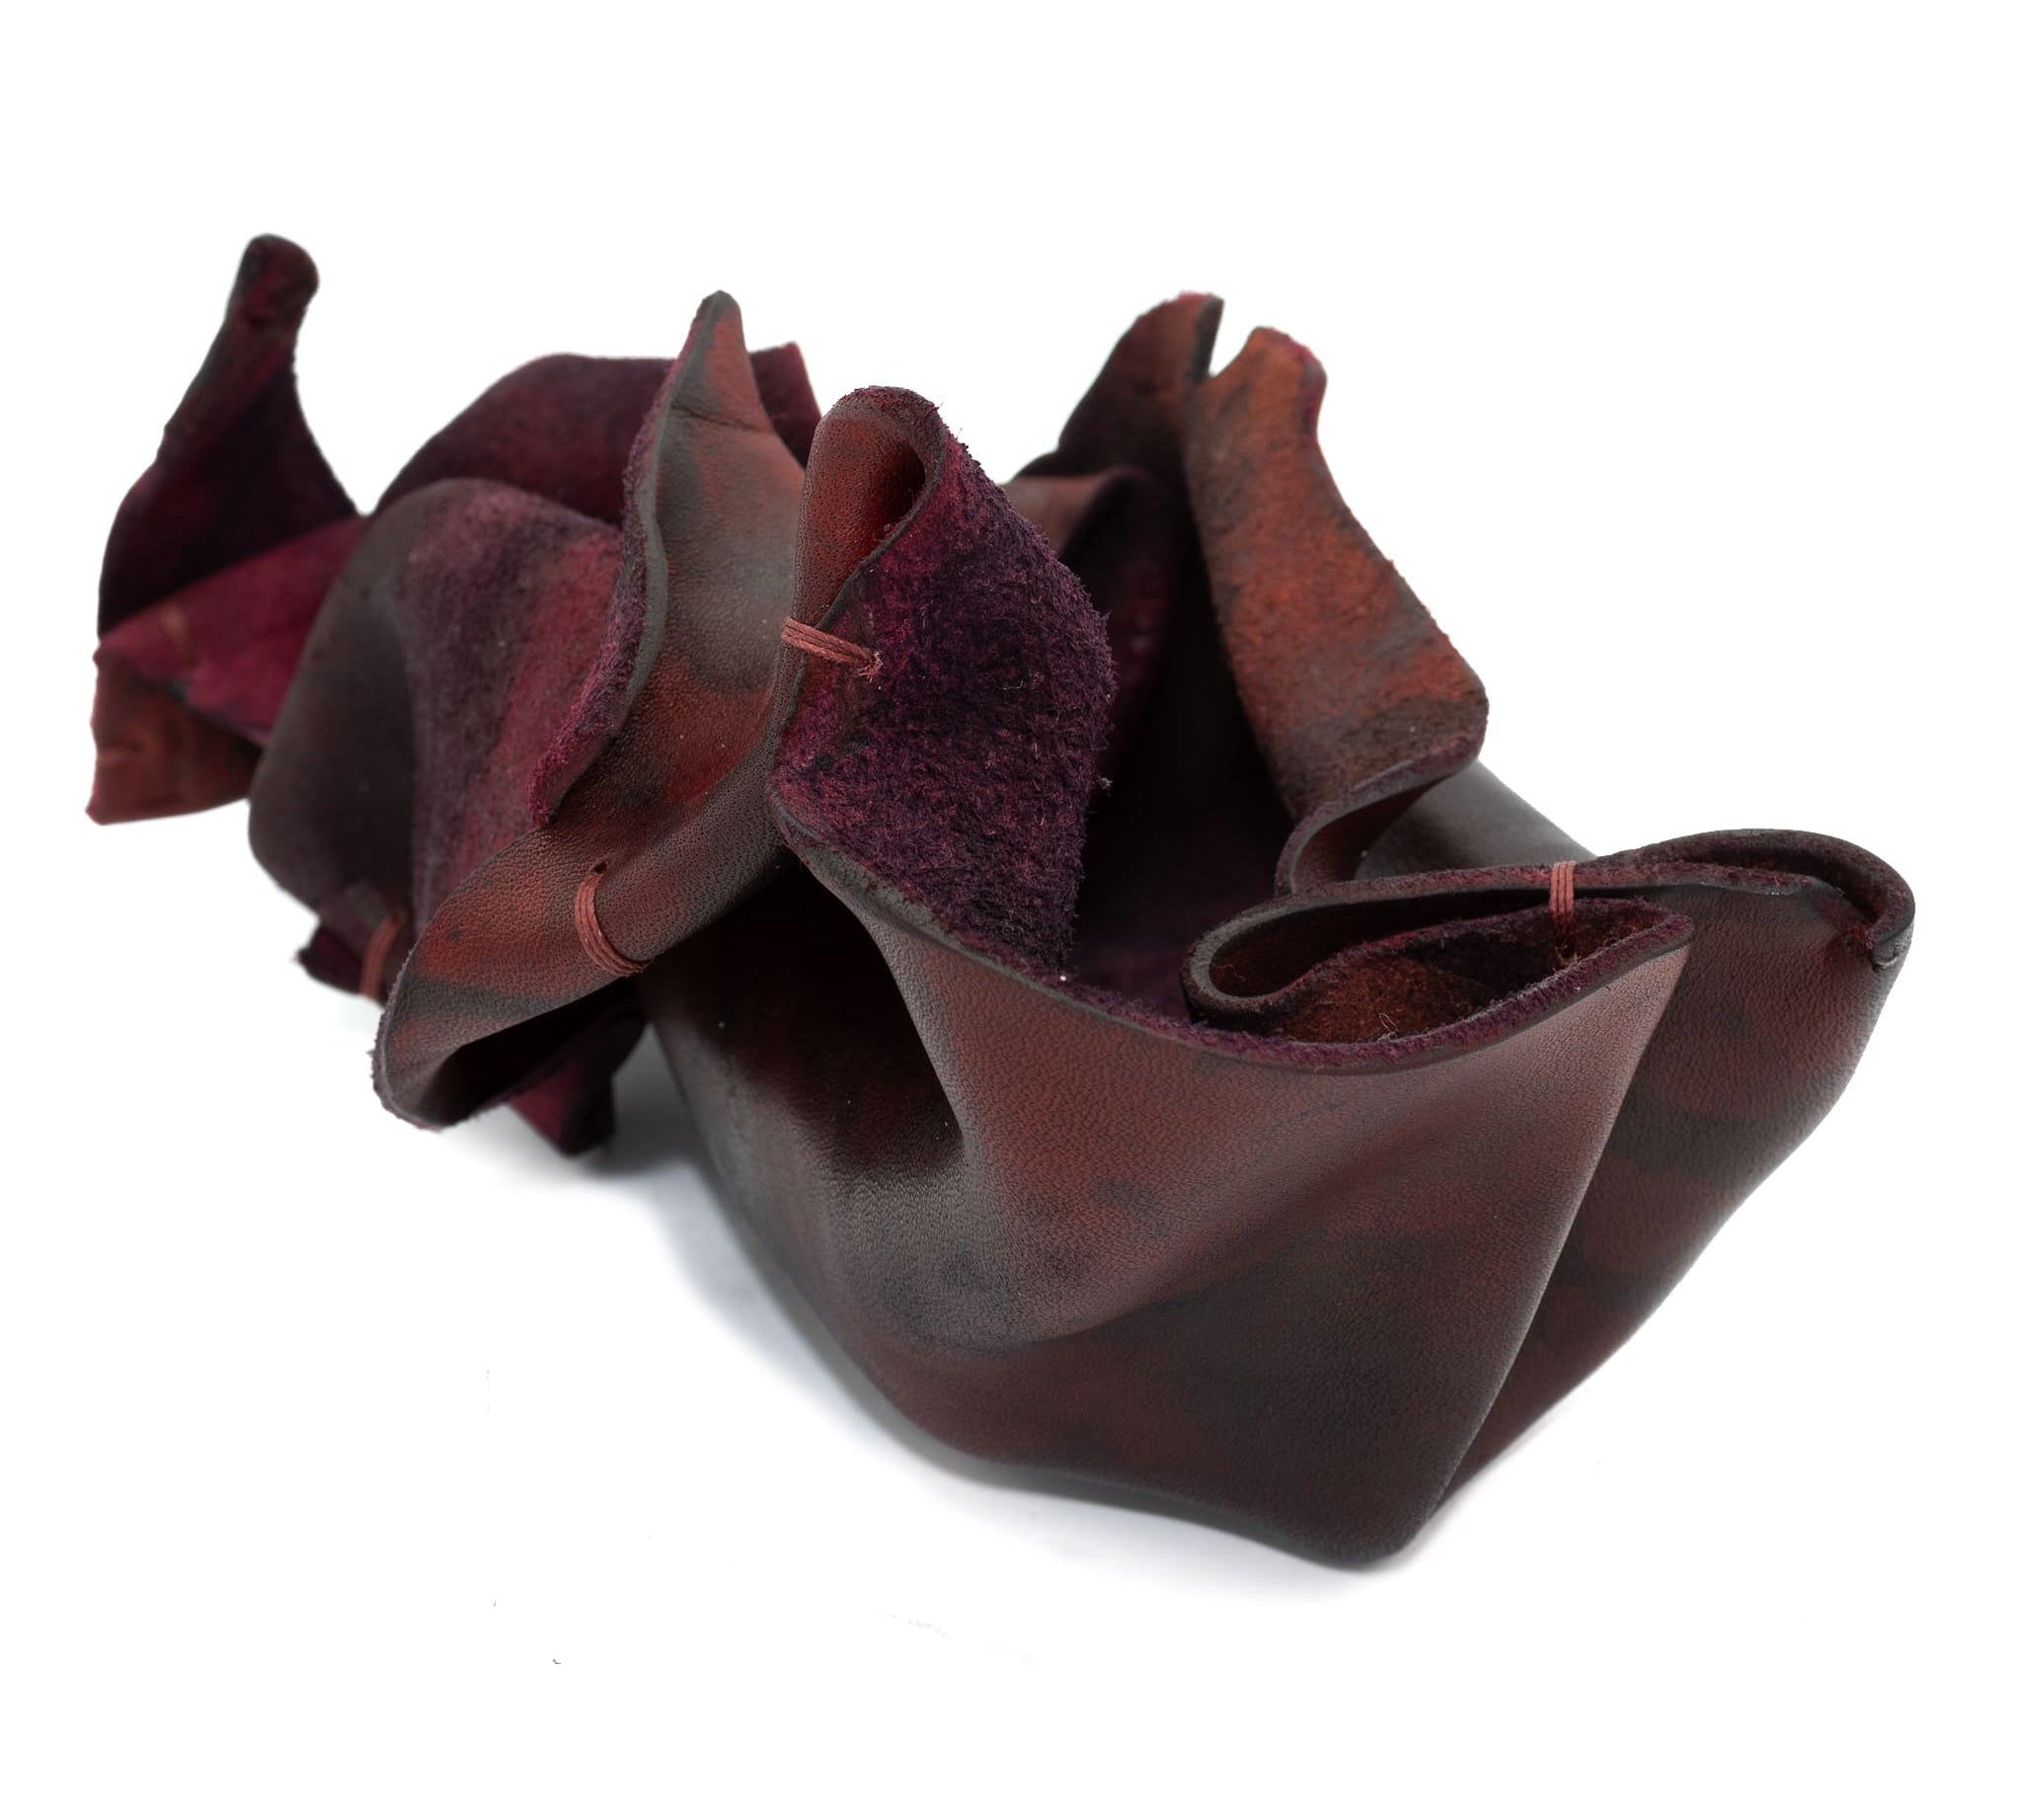 wet moulded and hand dyed abstract italian horse culatta leather jewellery trays, entirely hand crafted by uk based independent designer atelier skn.